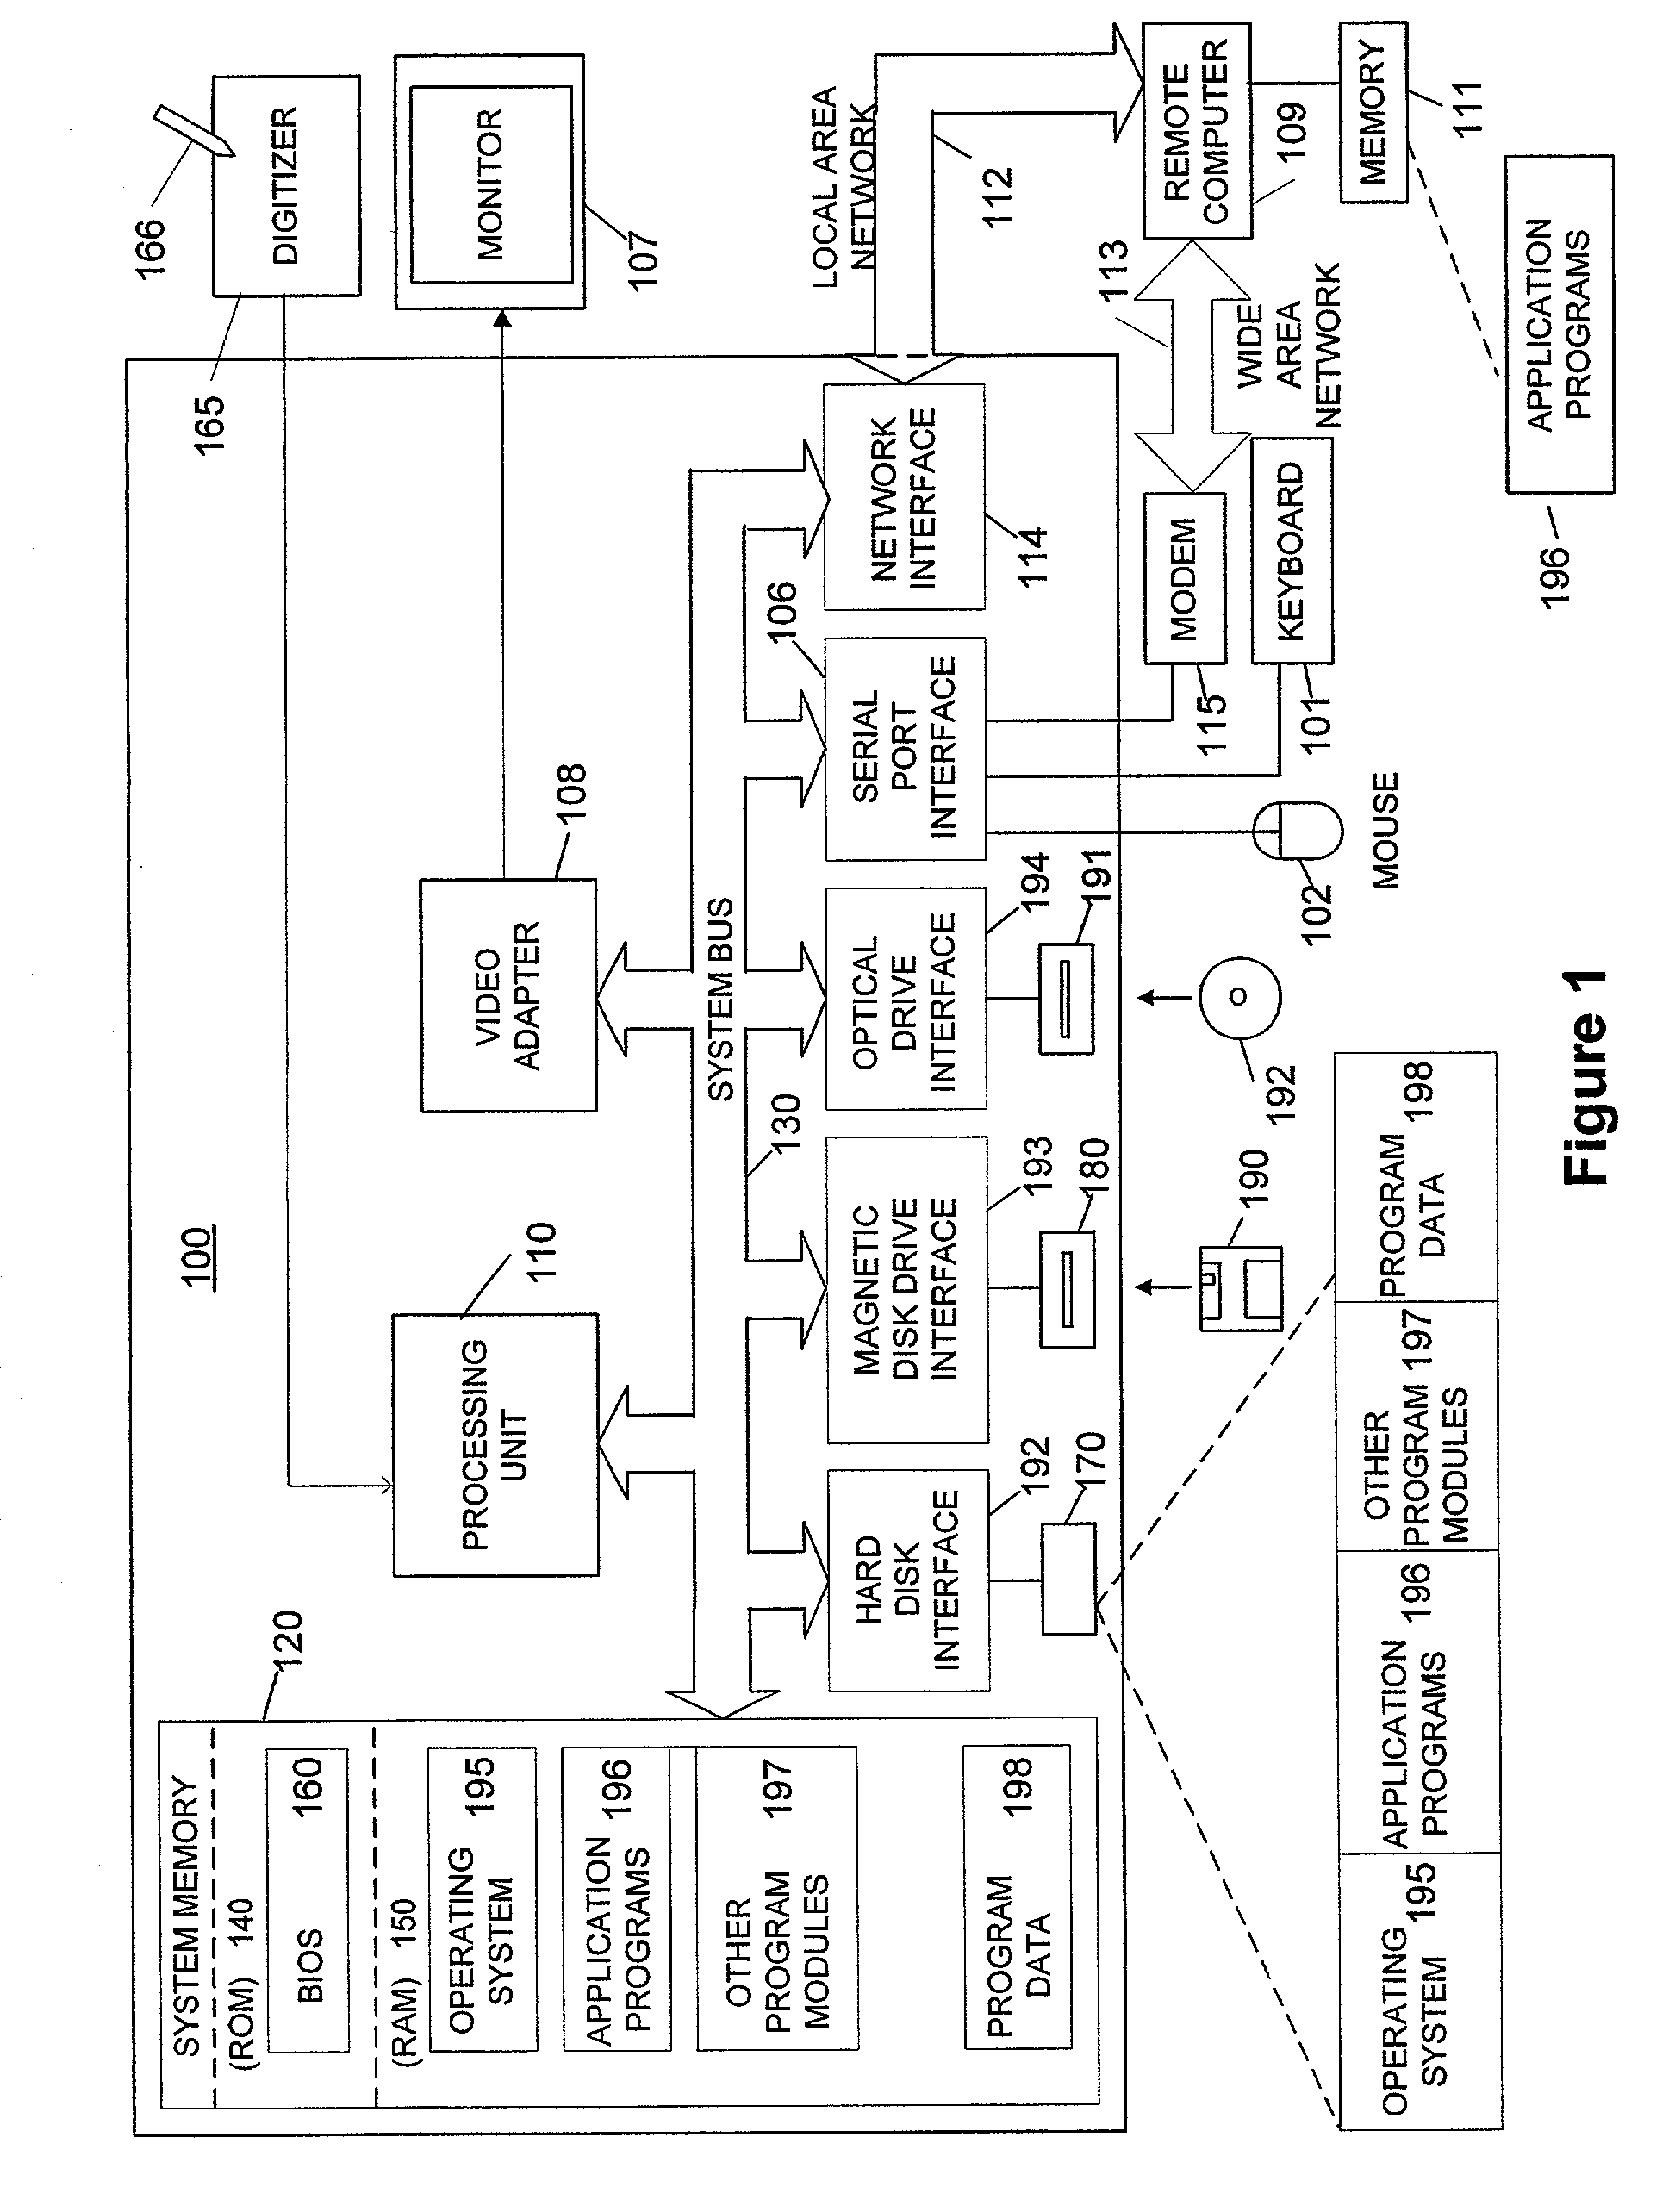 Preprocessing of multi-line rotated electronic ink